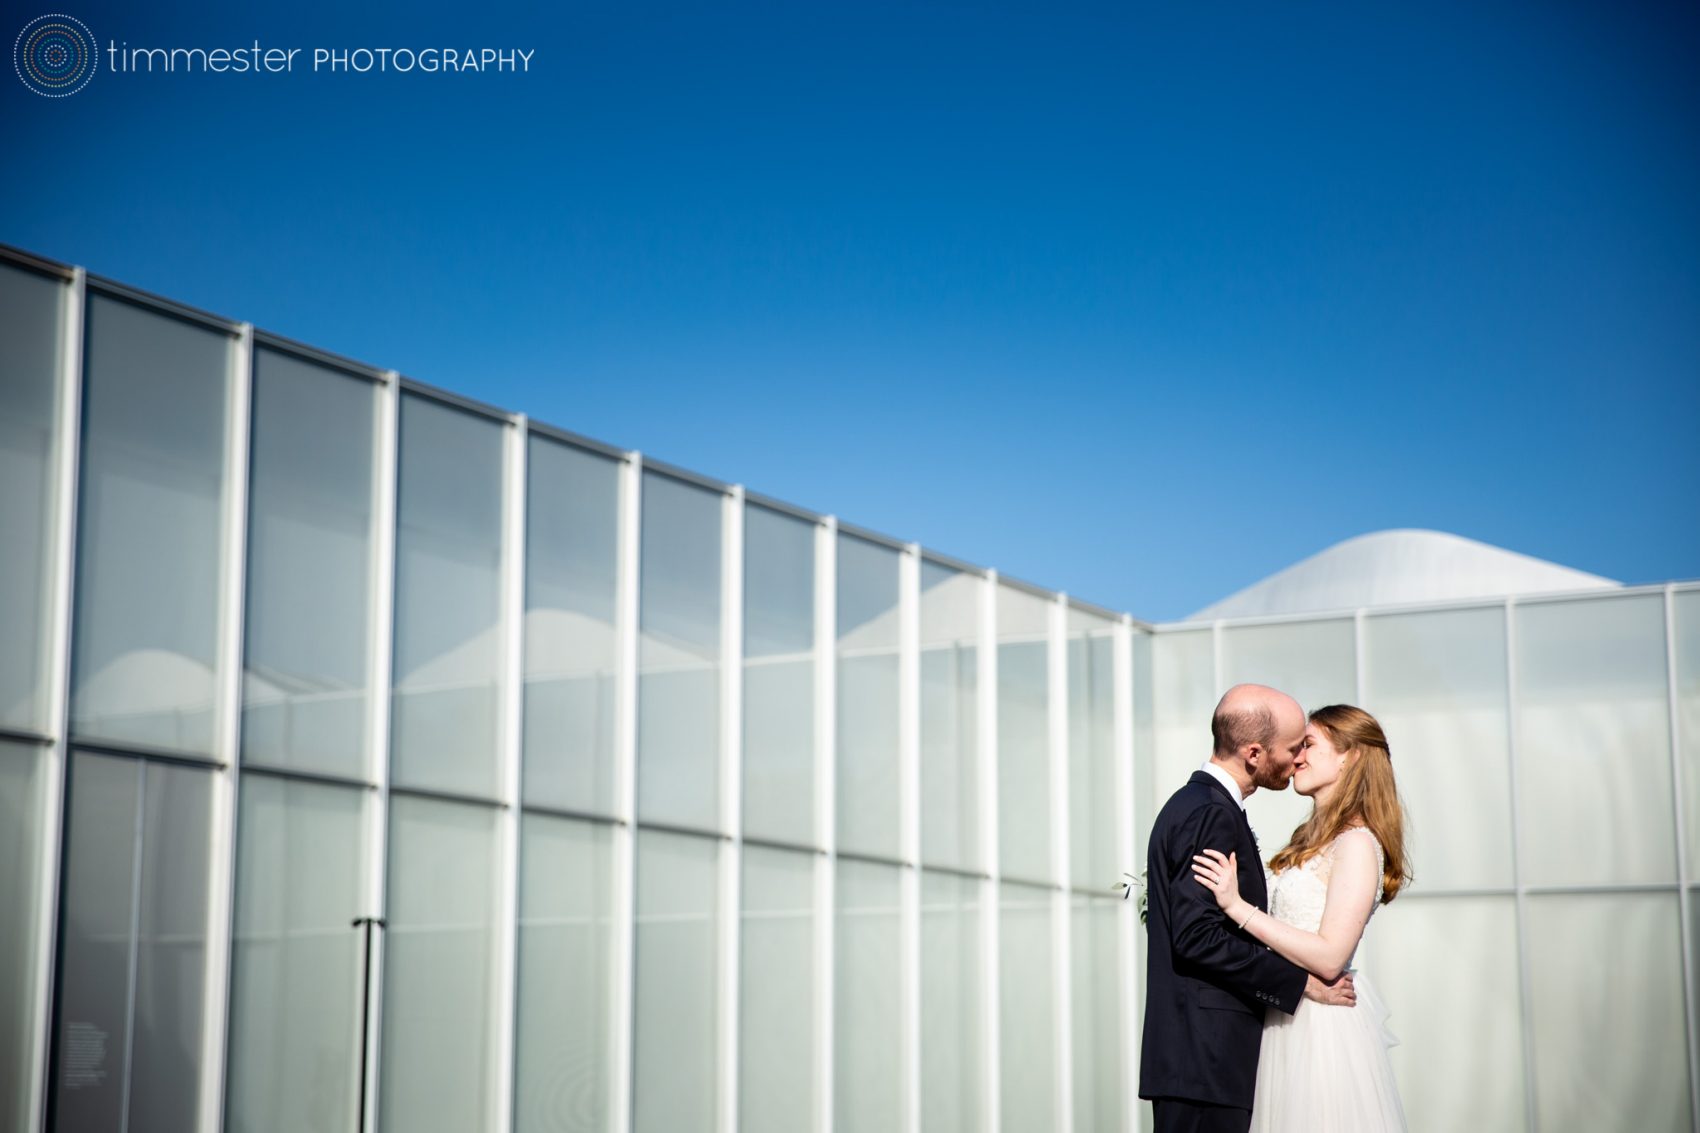 A wedding at the NC Museum of Art in Raleigh, North Carolina.